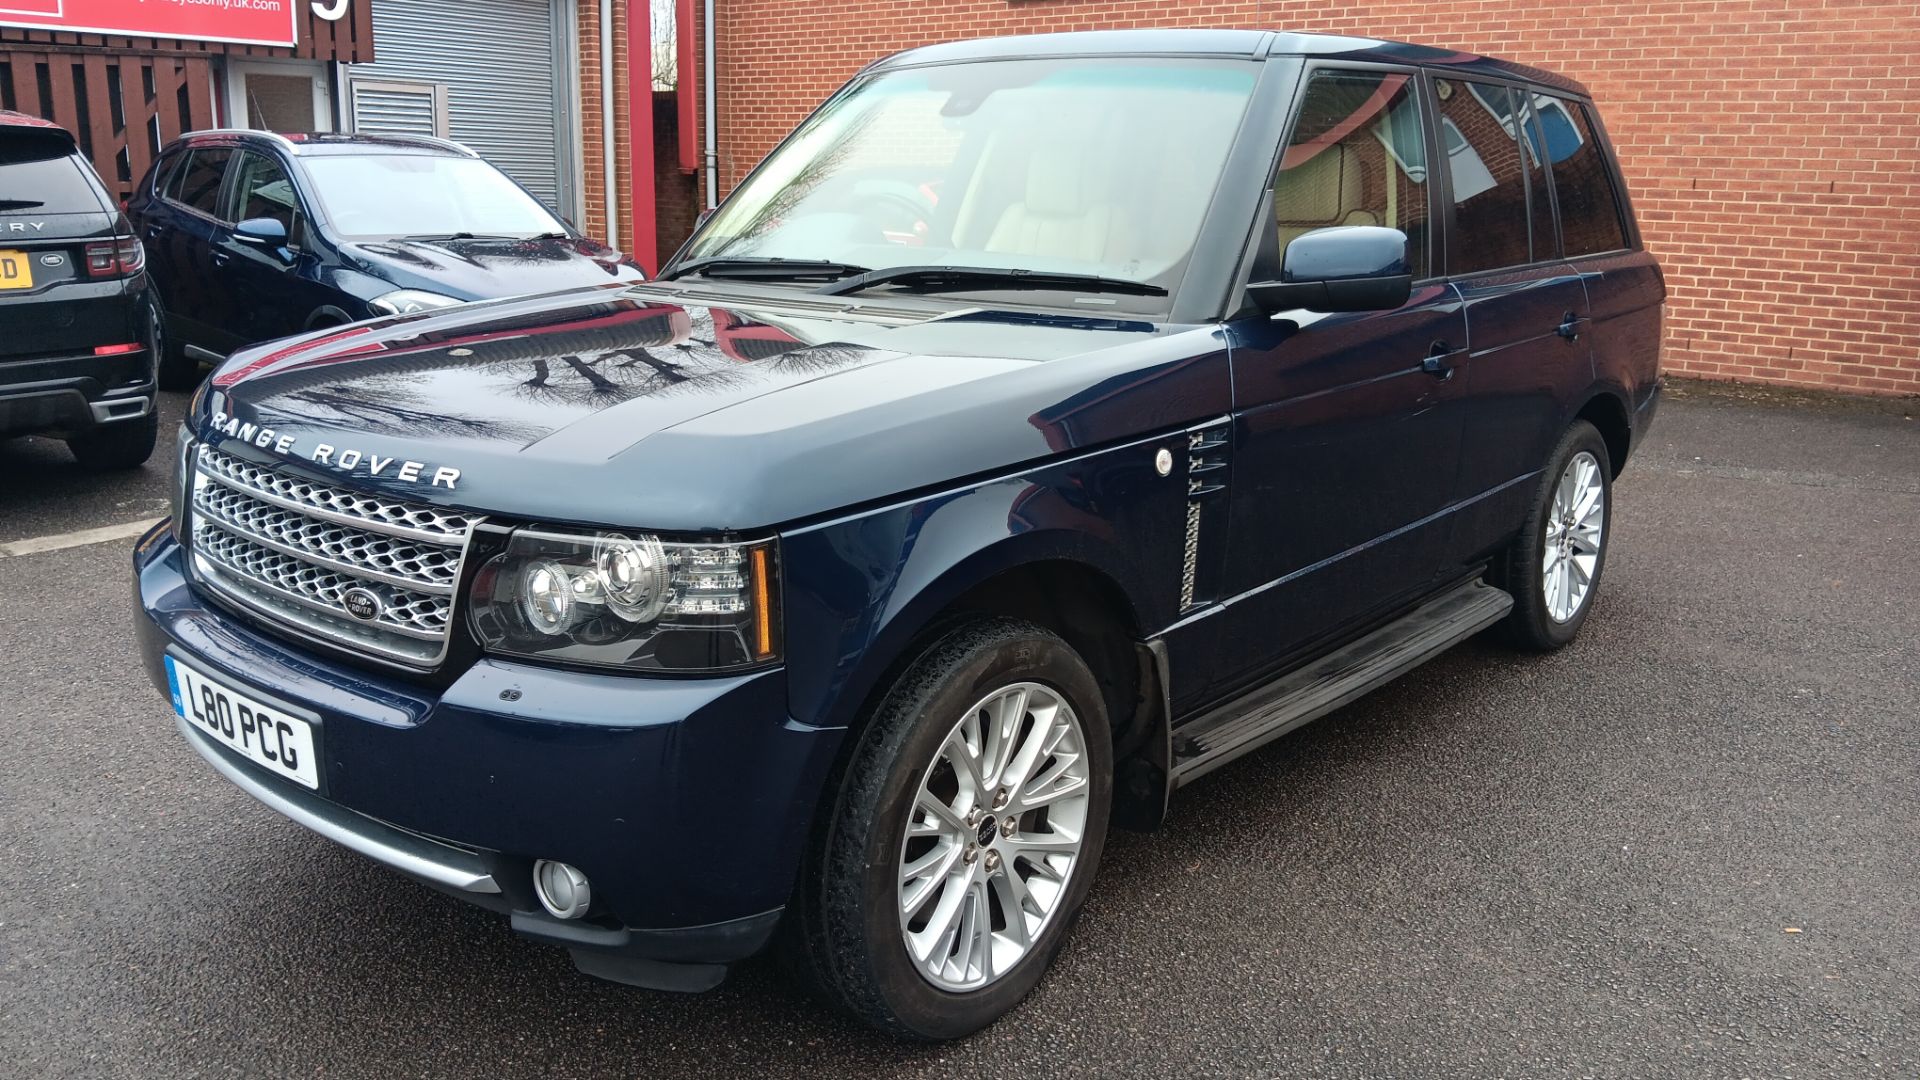 Land Rover Range Rover Special Editions 4.4 TDV8 Westminster 4dr 8 speed Auto, Registration L80 PCG - Image 3 of 28